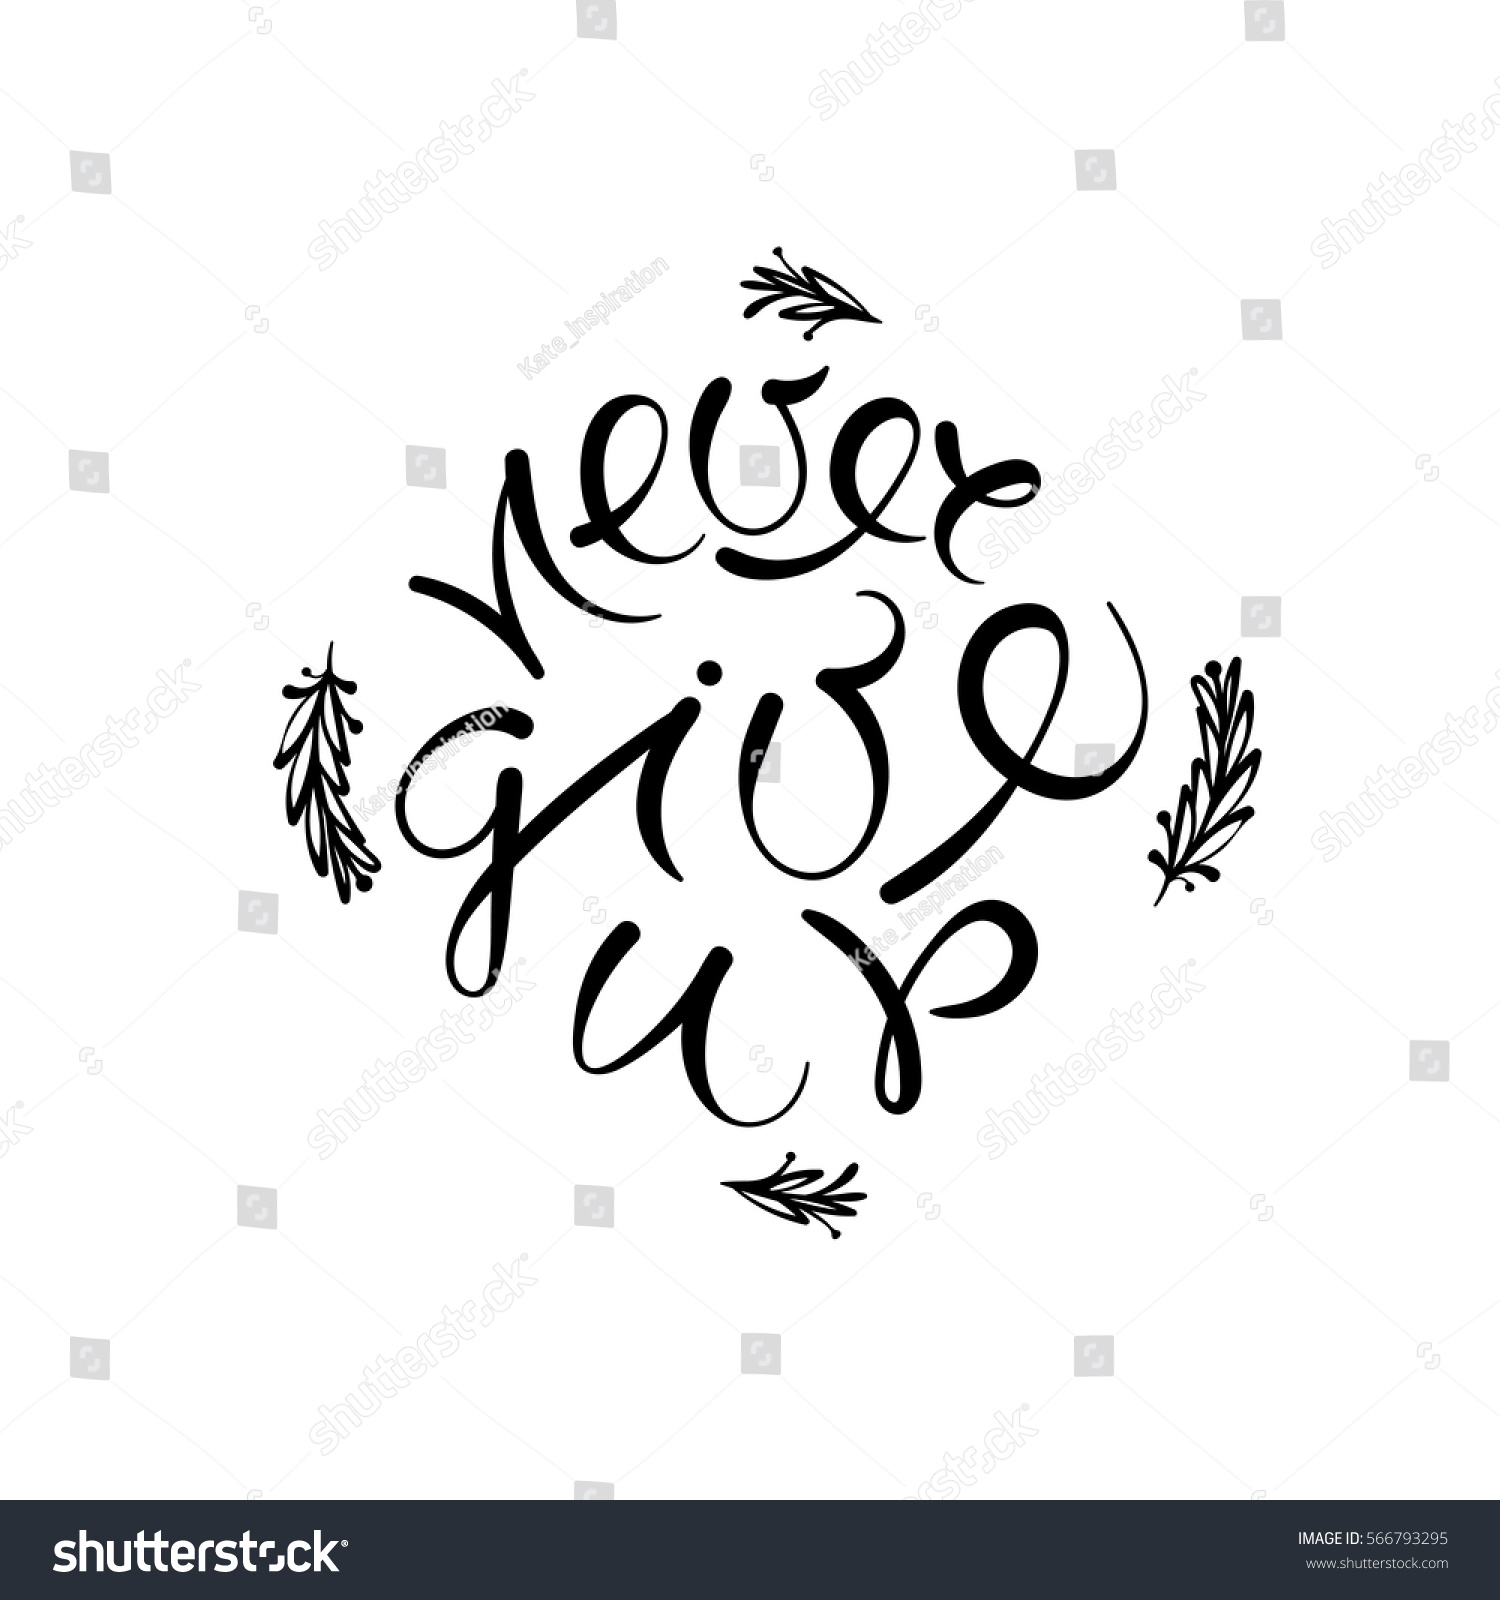 Never Give Up Vector Hand Drawn Stock Vector 566793295 - Shutterstock